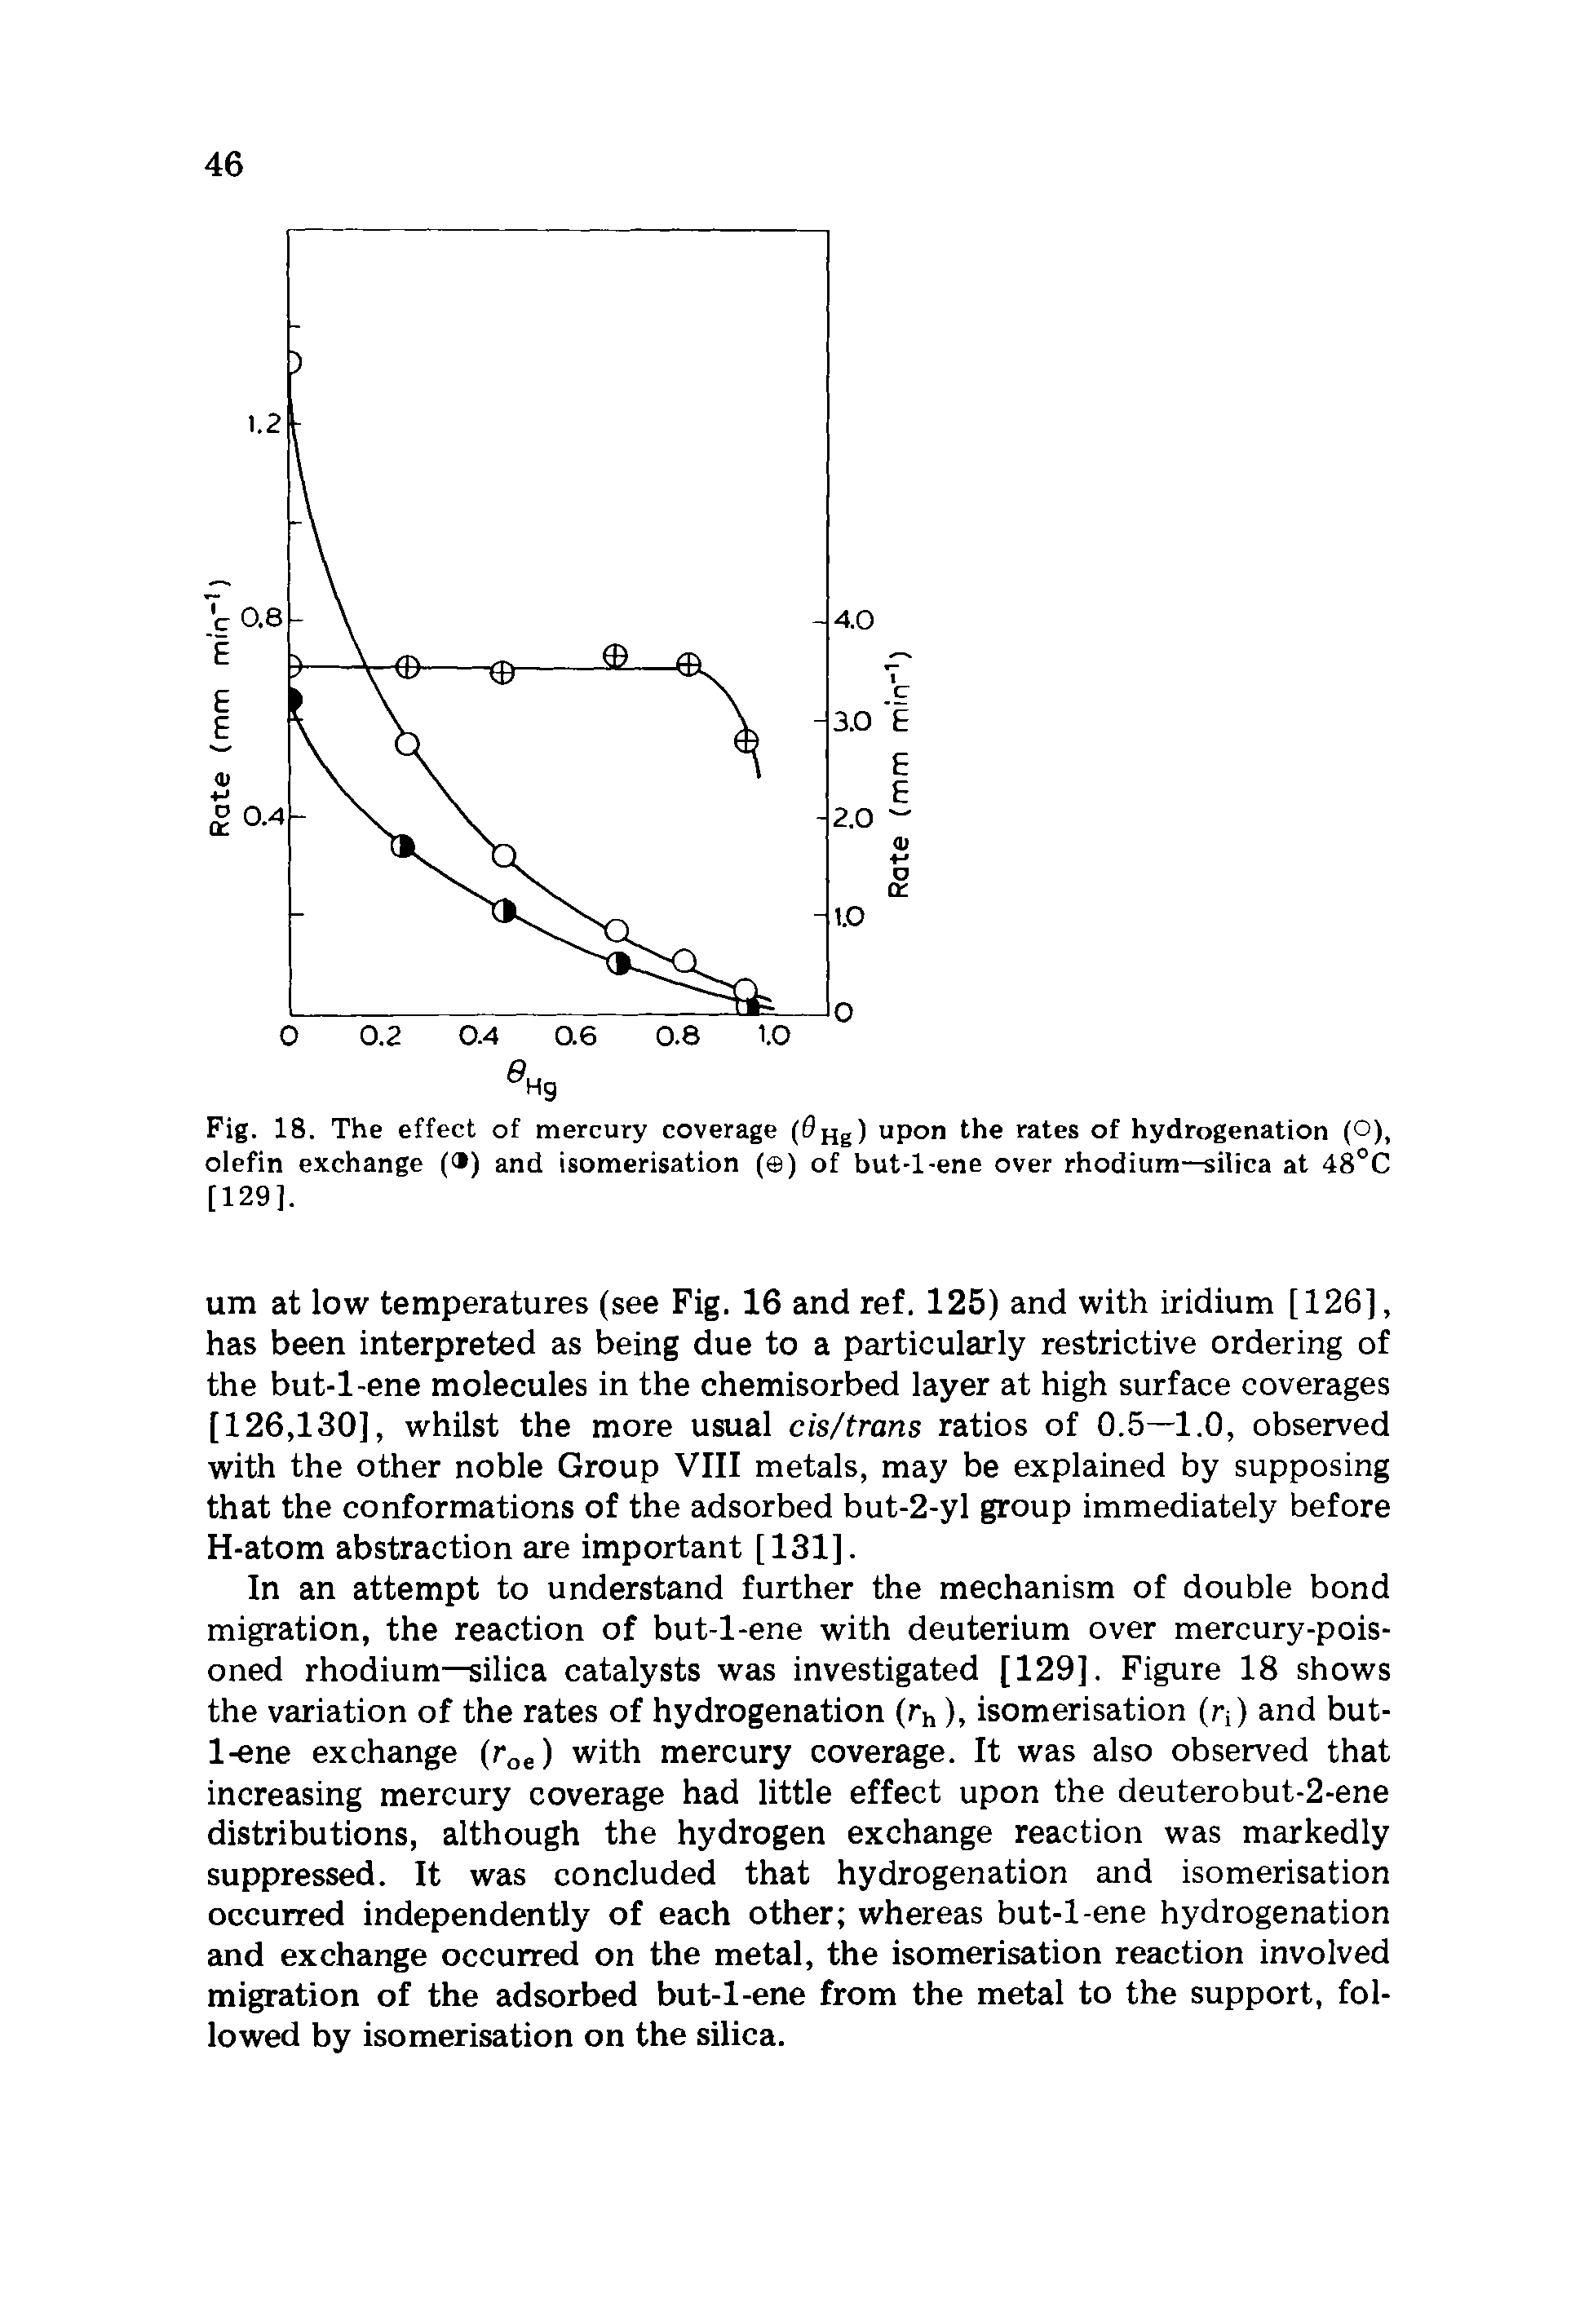 Fig. 18. The effect of mercury coverage ( Hg) upon the rates of hydrogenation (O), olefin exchange ( ) and isomerisation ( ) of but-l-ene over rhodium—silica at 48°C [129].